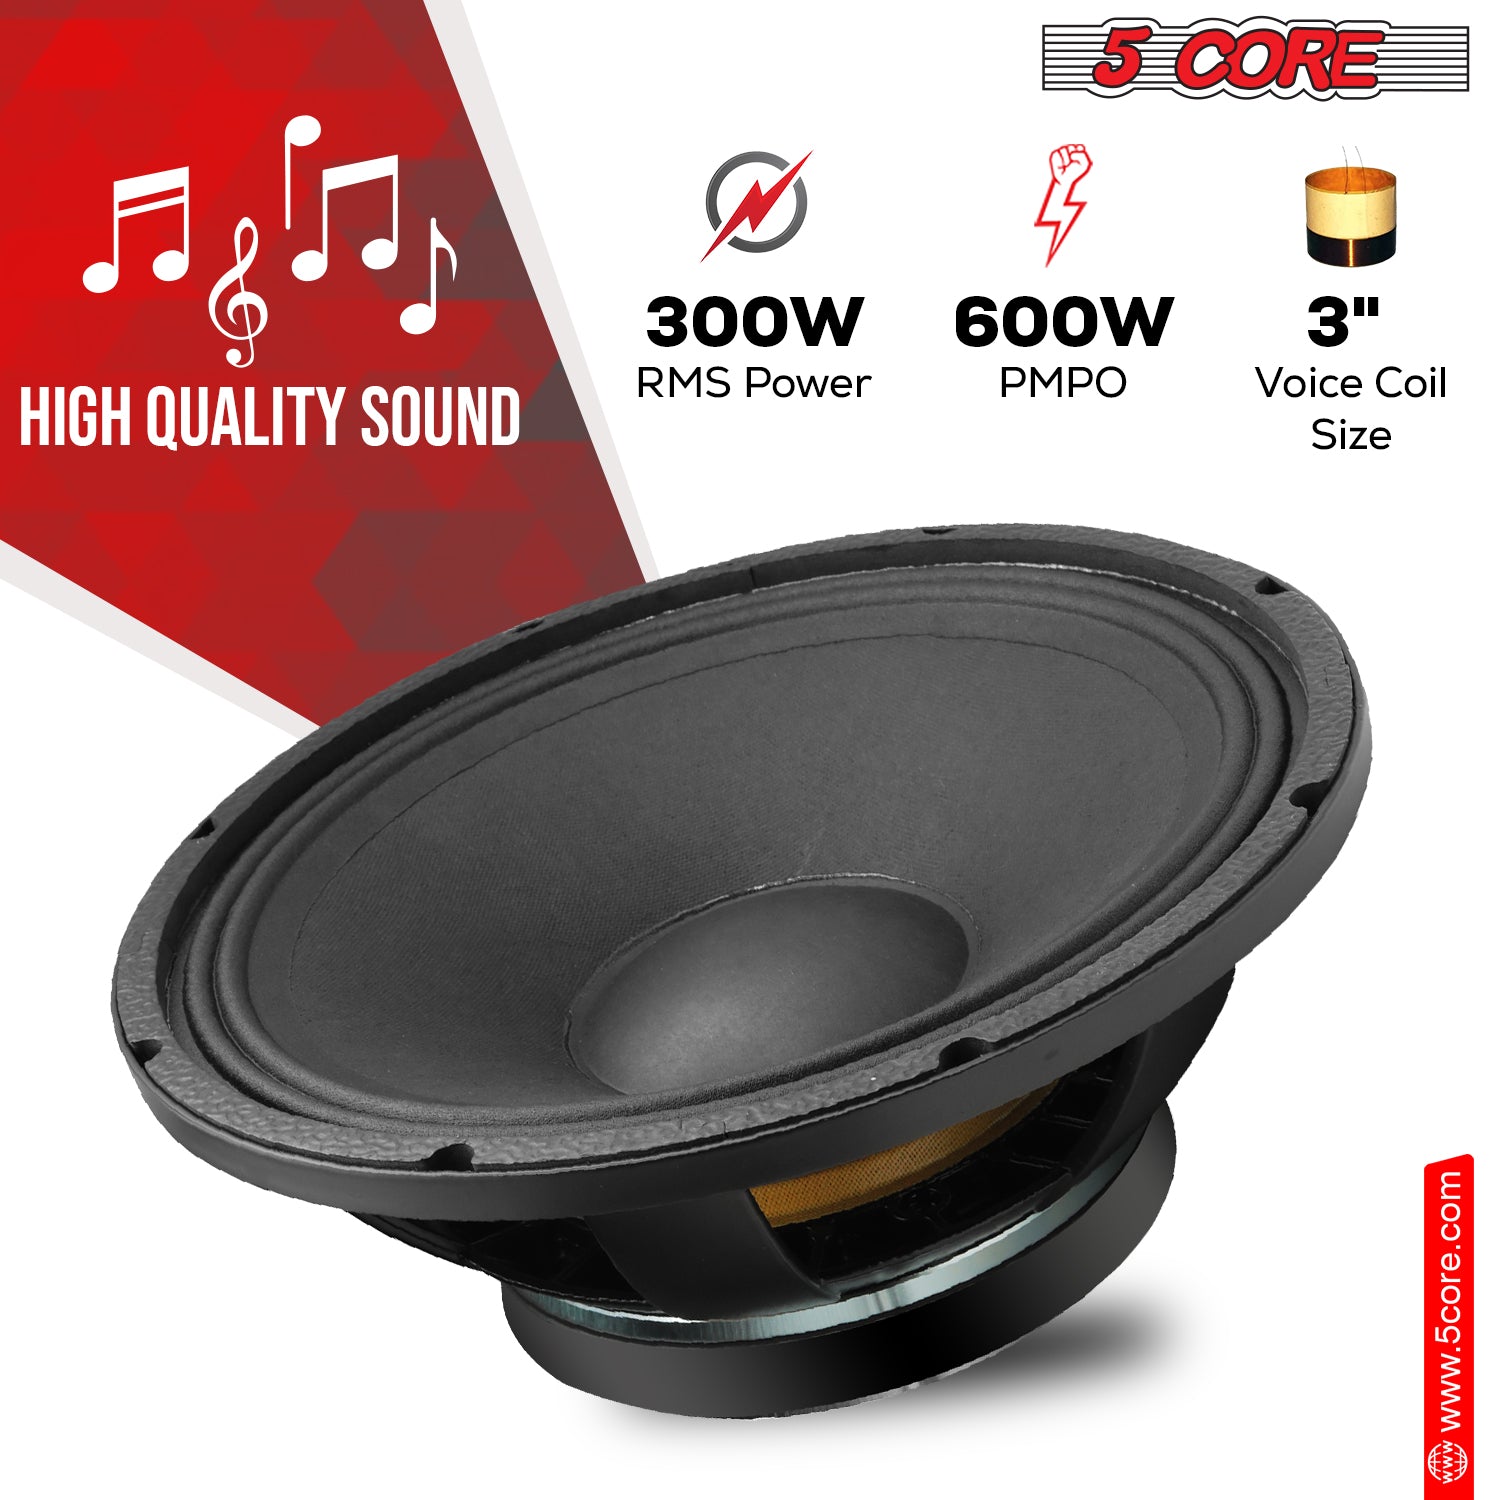 High-Power 8 Ohm Replacement Driver Speakers by 5 Core